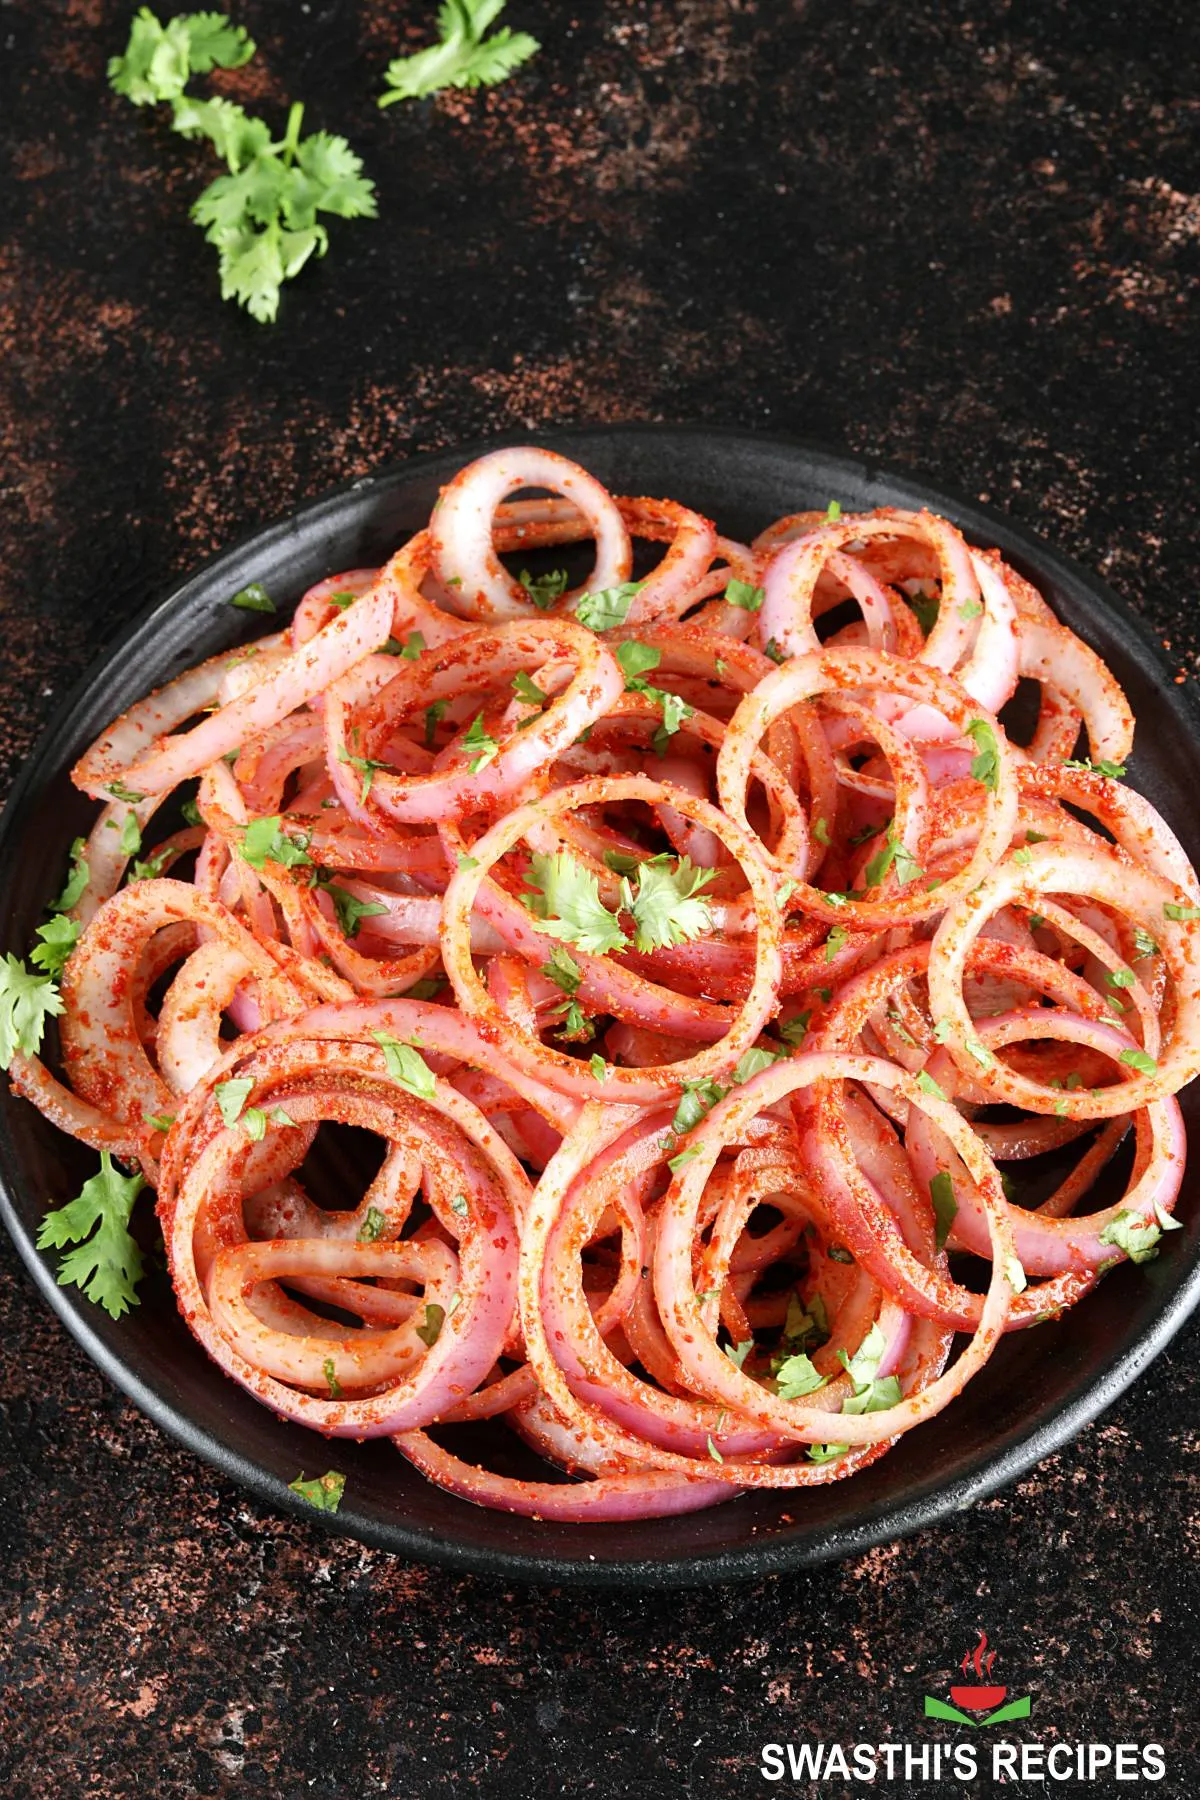 Onion salad made with raw onion rings, spices and lemon juice